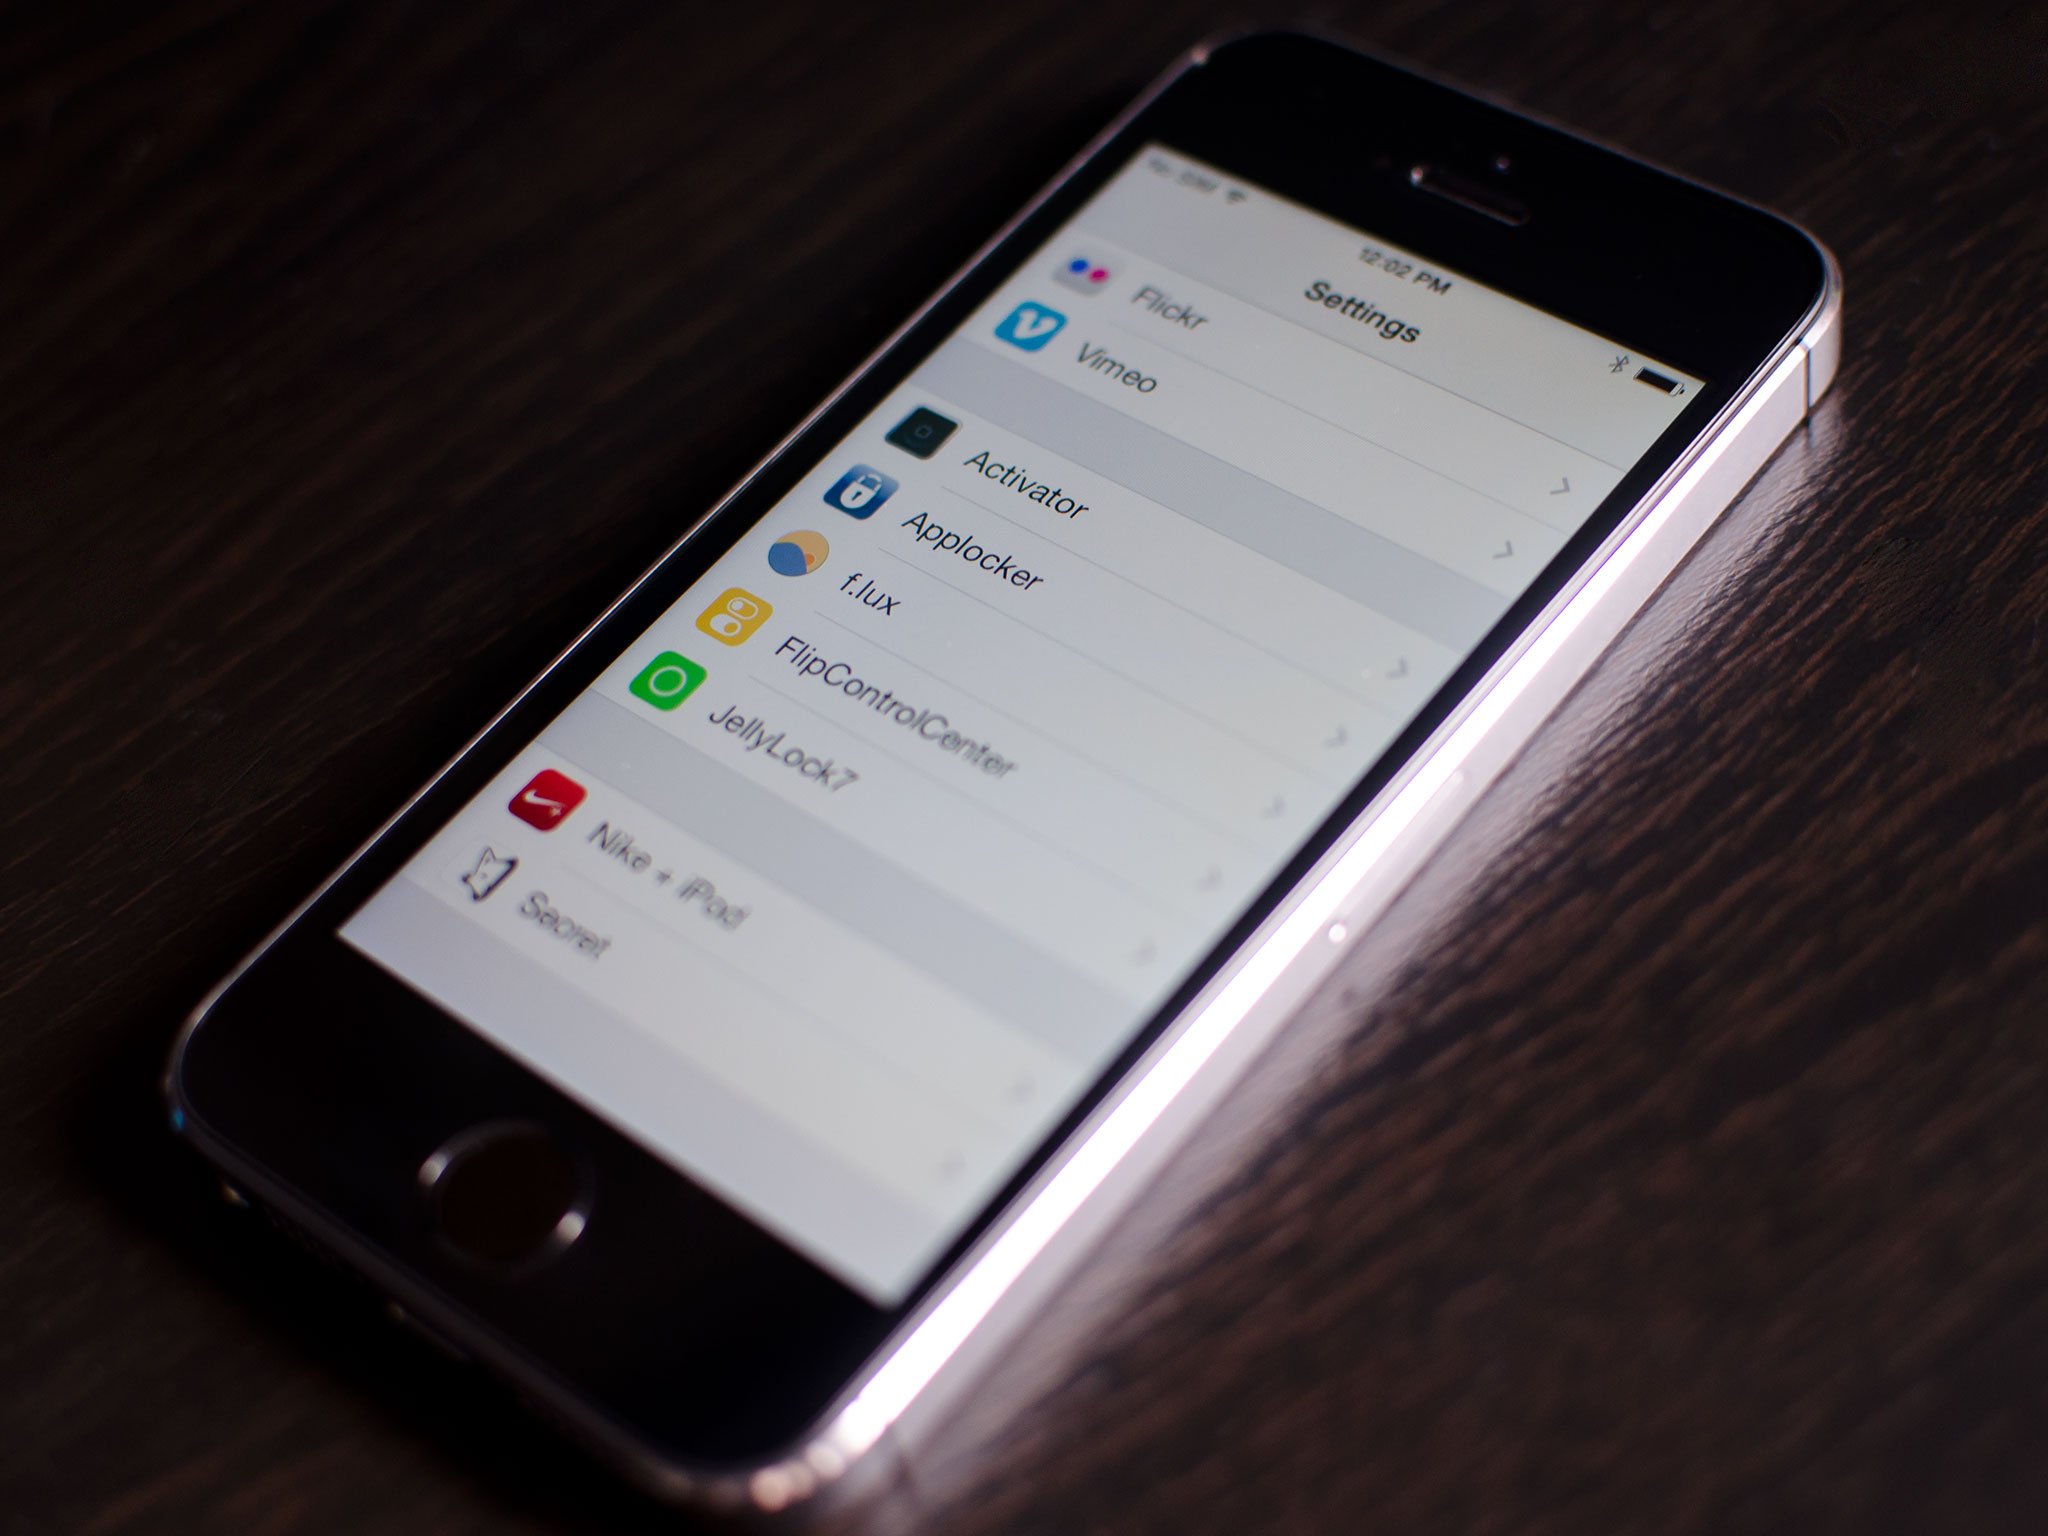 Best jailbreak tweaks for power-users: JellyLock7, SwitchSpring, Activator, and more!